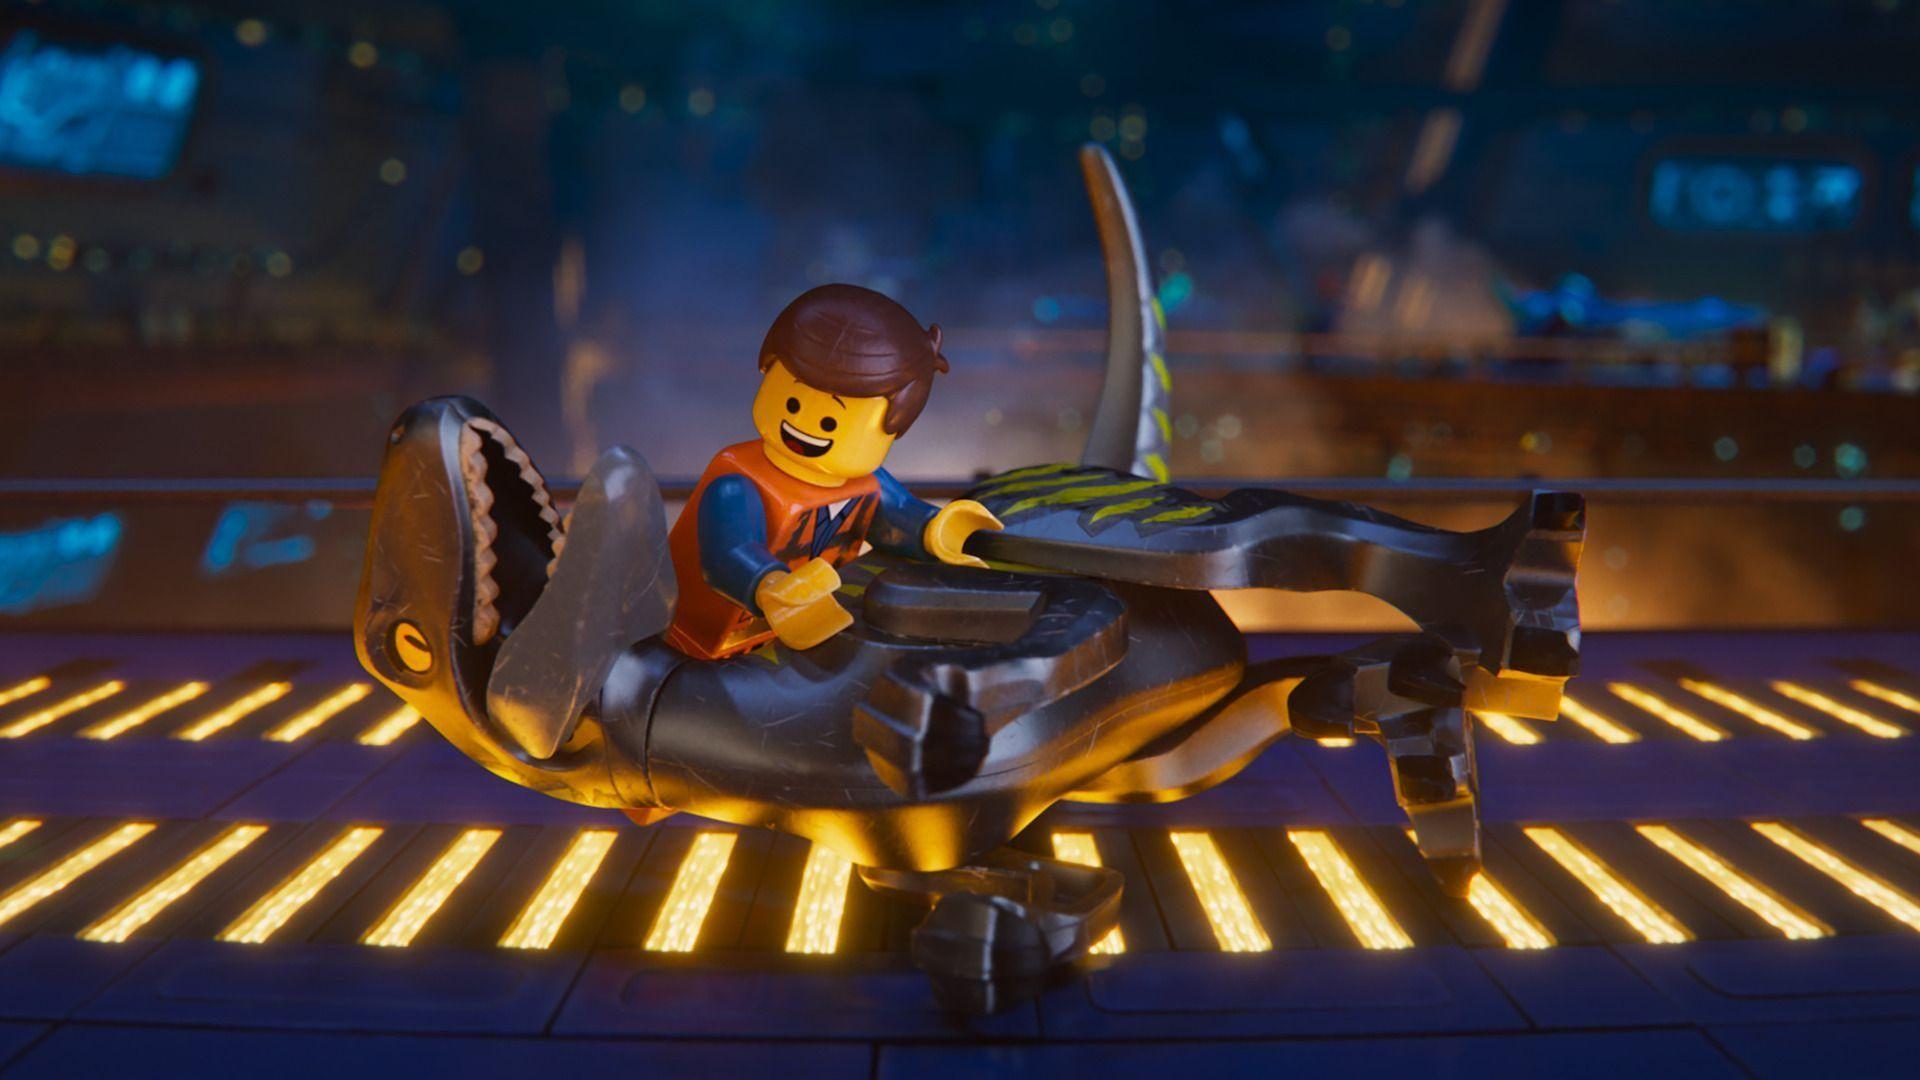 Everything is slightly less awesome in 'The Lego Movie 2'